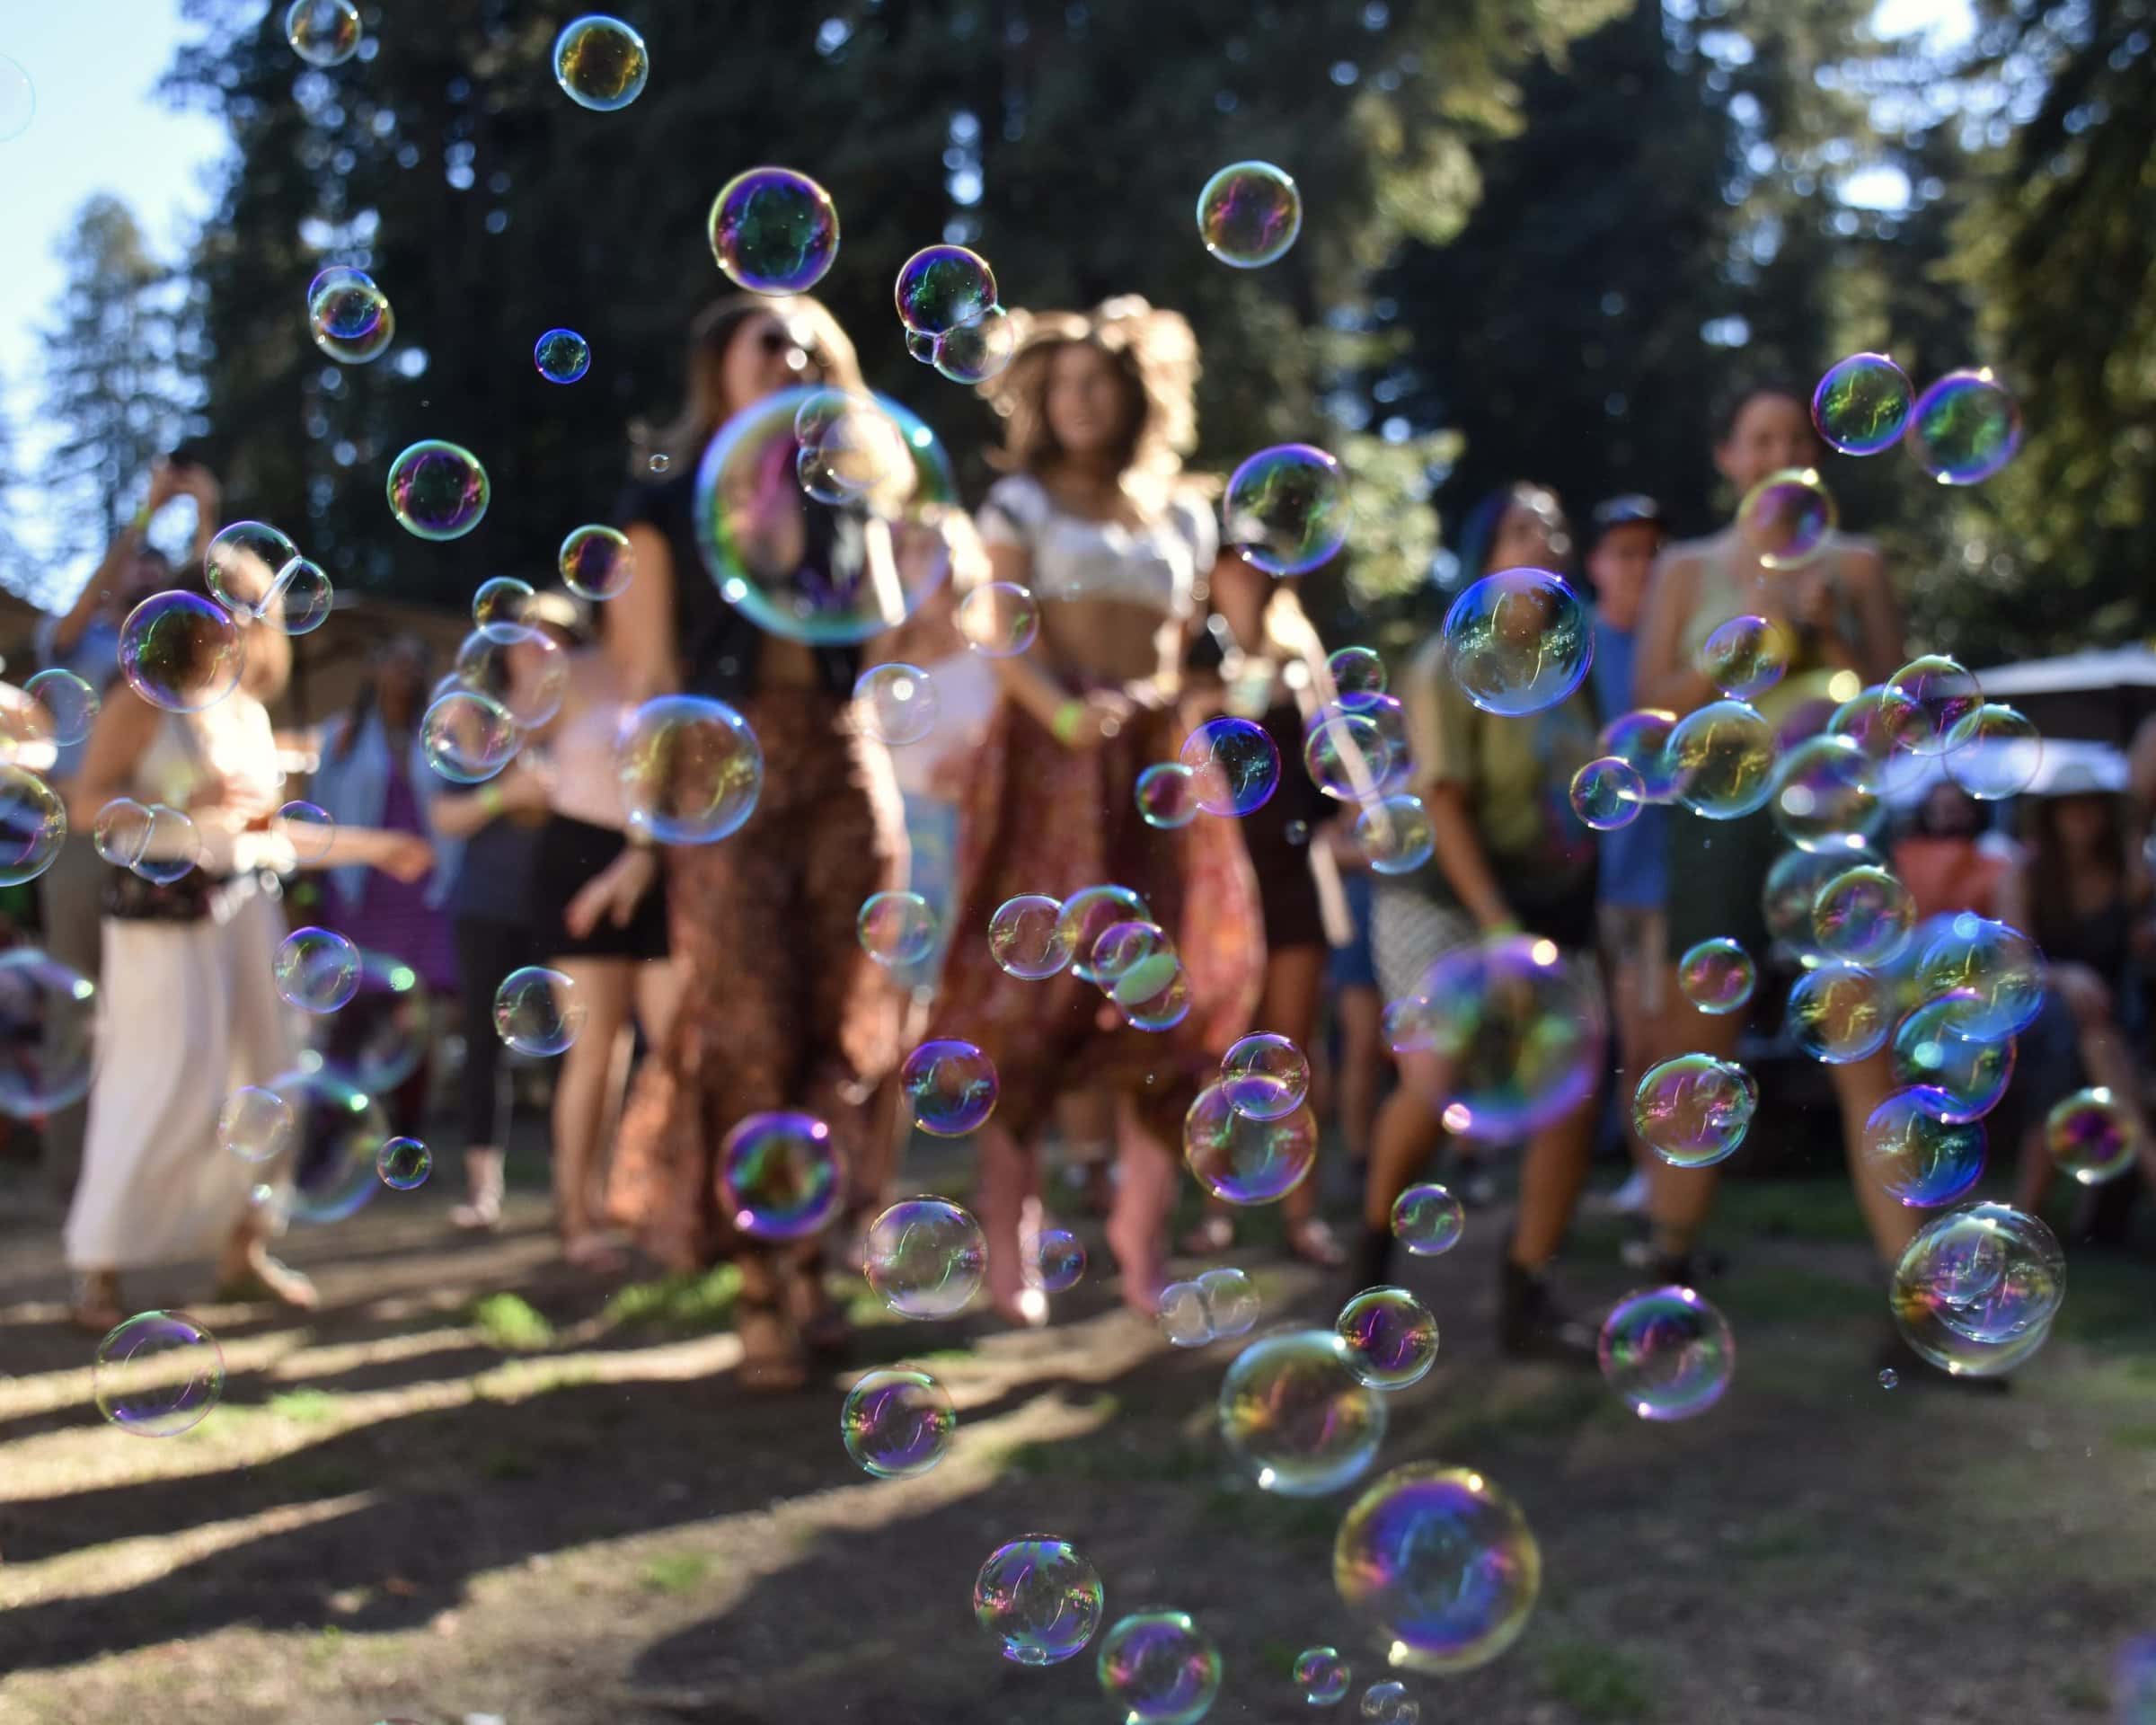 Photograph of bubbles in front of audience at the Real Neato Music Festival at the Rio Nido Roadhouse in Rio Nido by William Wayland for Static and Blur